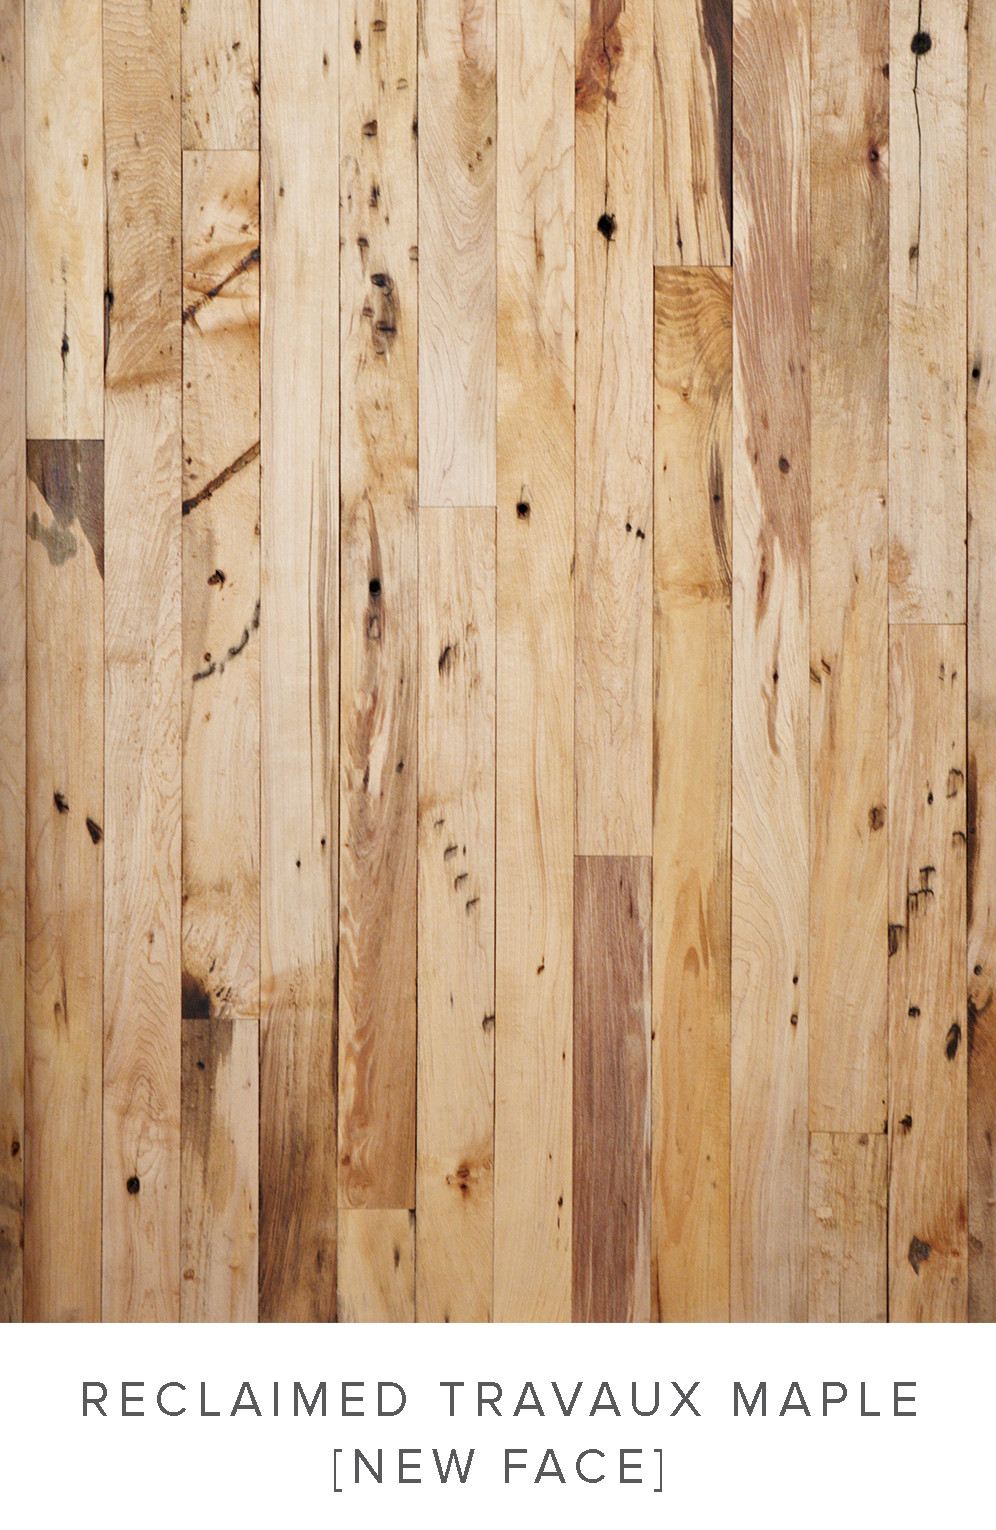 22 Fantastic Maple Amber Hardwood Flooring 2024 free download maple amber hardwood flooring of extensive range of reclaimed wood flooring all under one roof at the in reclaimed travaux maple new face